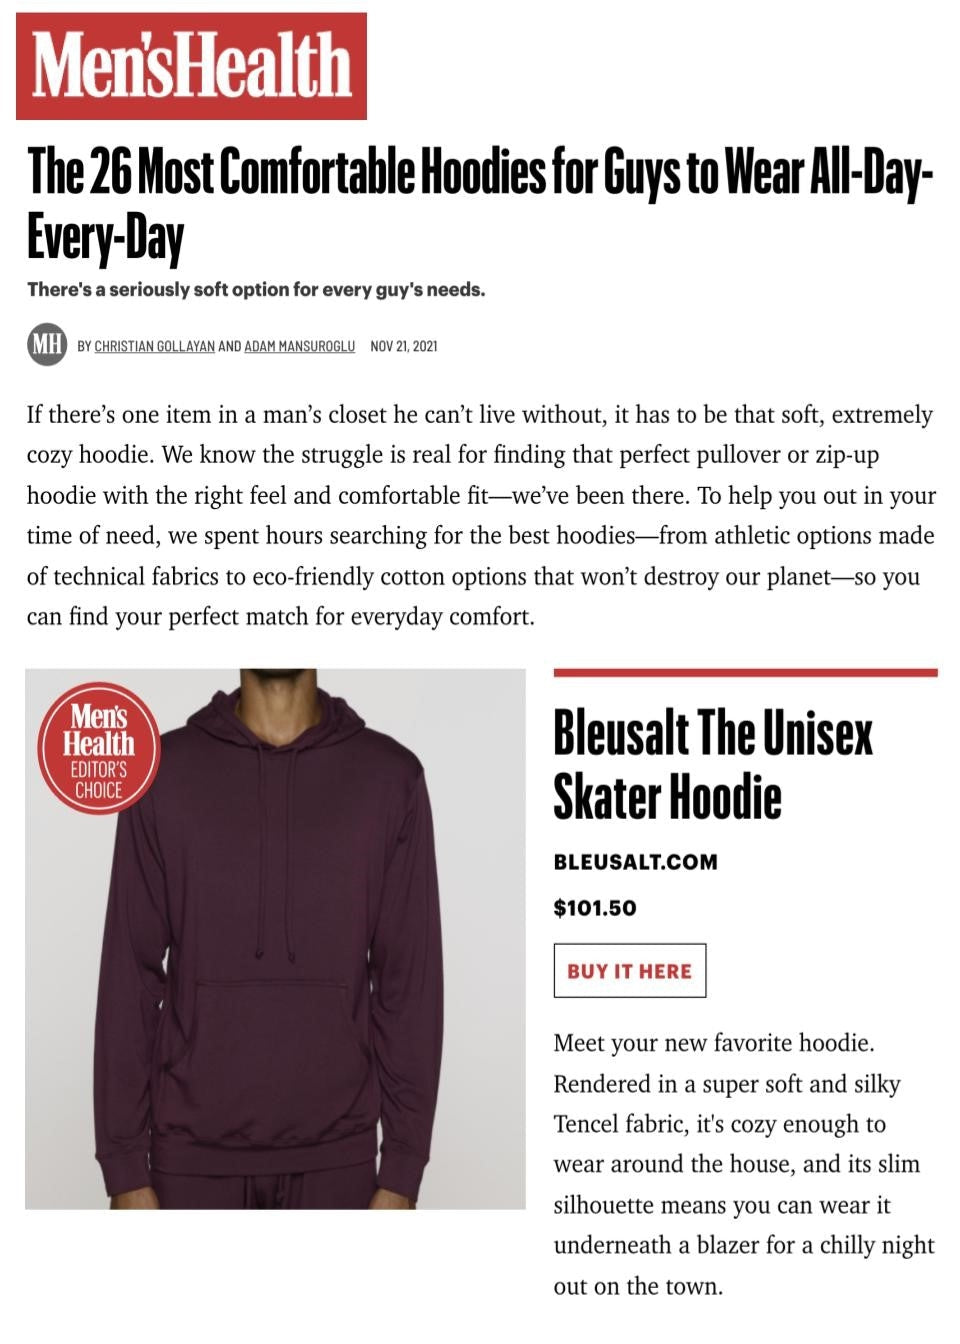 The 26 Most Comfortable Hoodies for Guys to Wear All-Day-Every-Day-Bleusalt